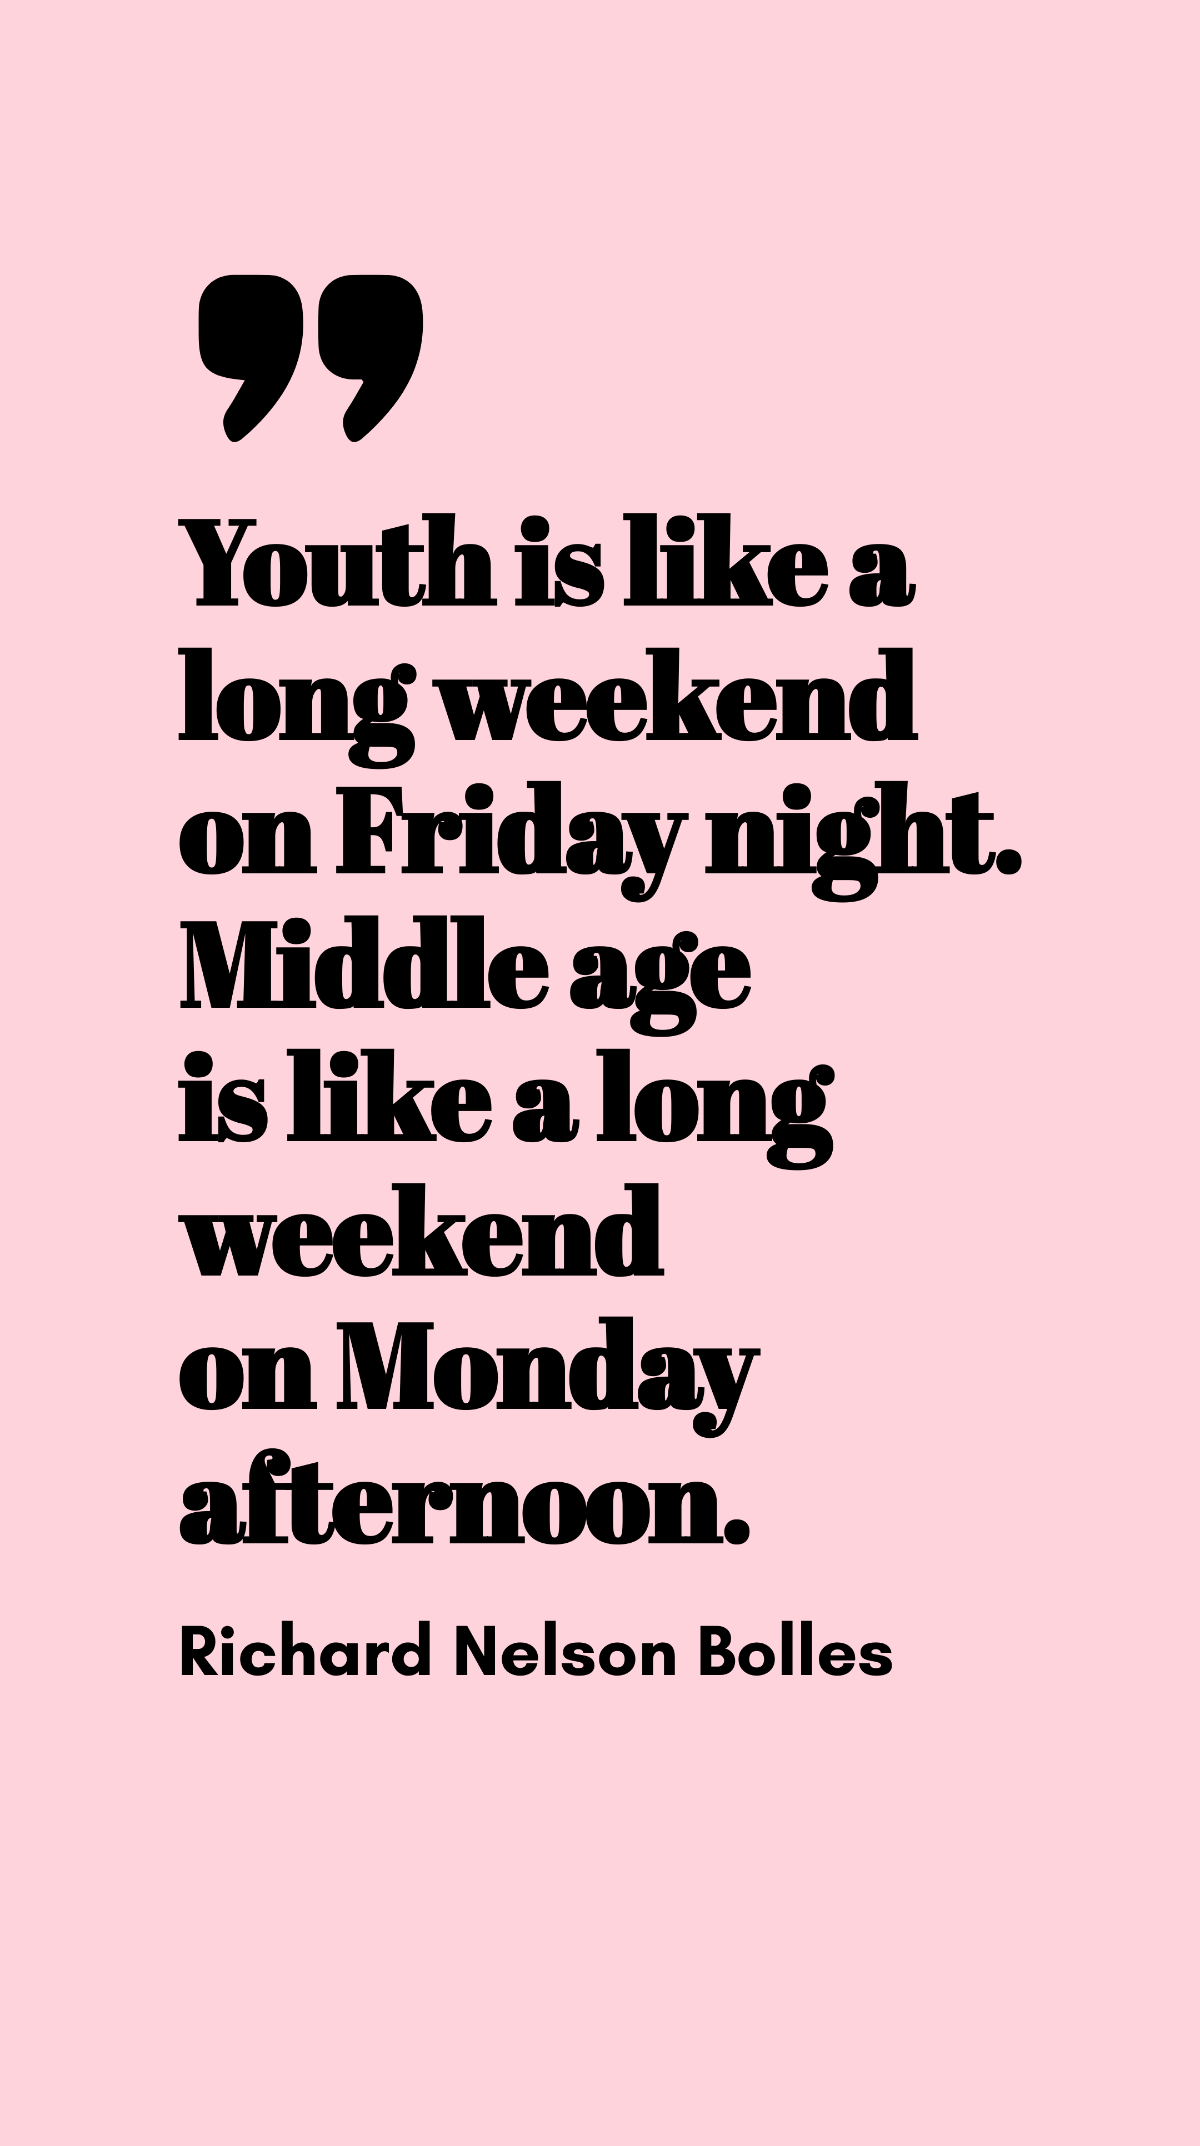 Richard Nelson Bolles - Youth is like a long weekend on Friday night. Middle age is like a long weekend on Monday afternoon. Template